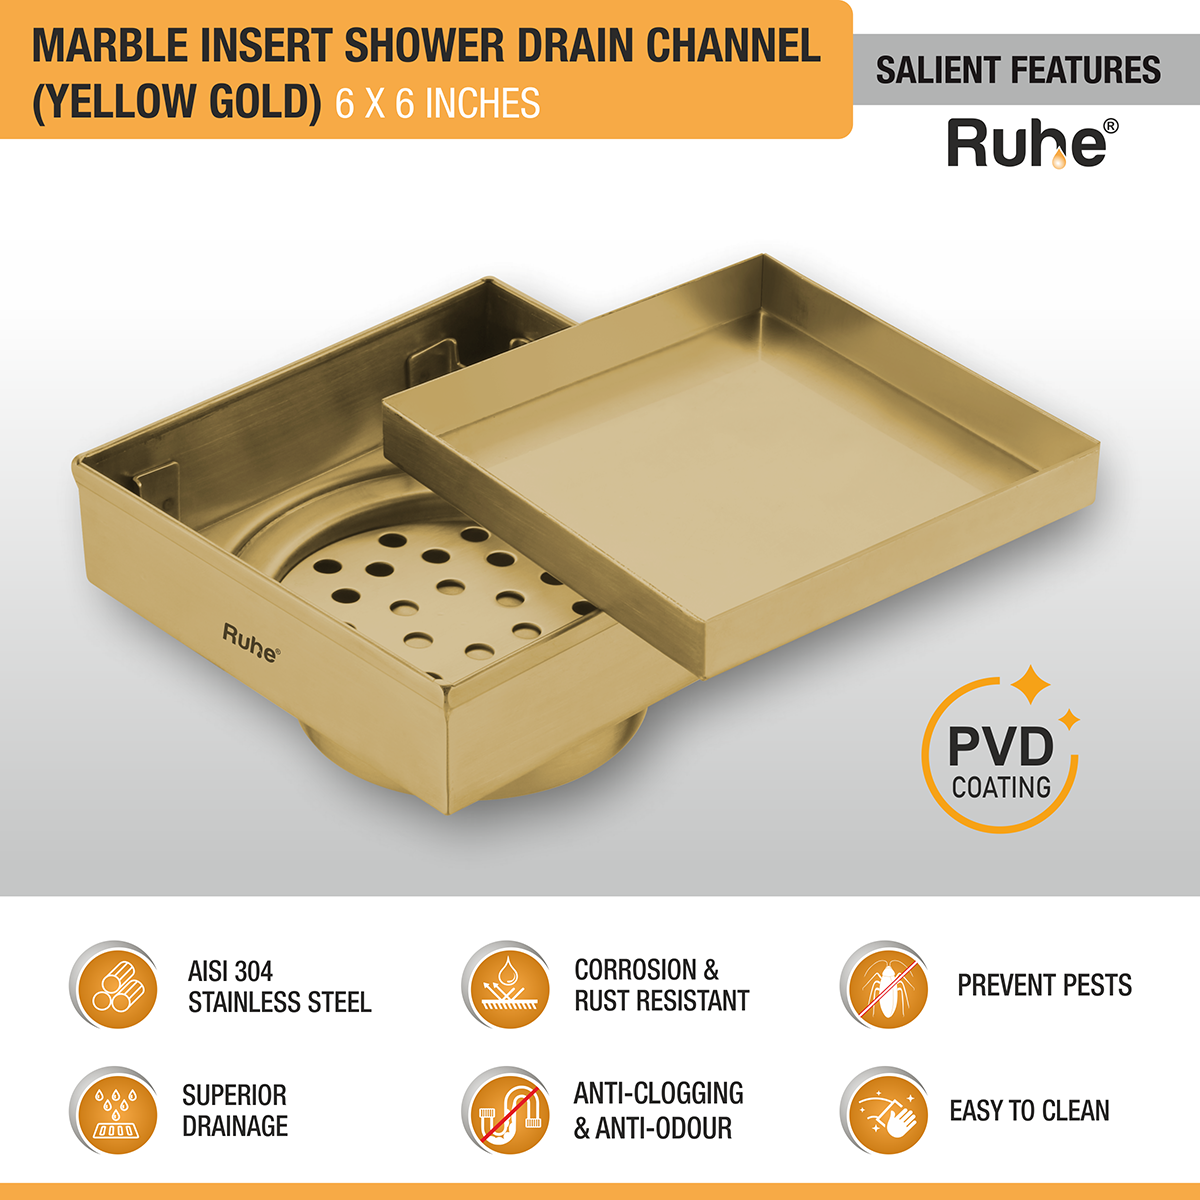 Marble Insert Shower Drain Channel (6 x 6 Inches) YELLOW GOLD PVD Coated features and benefits